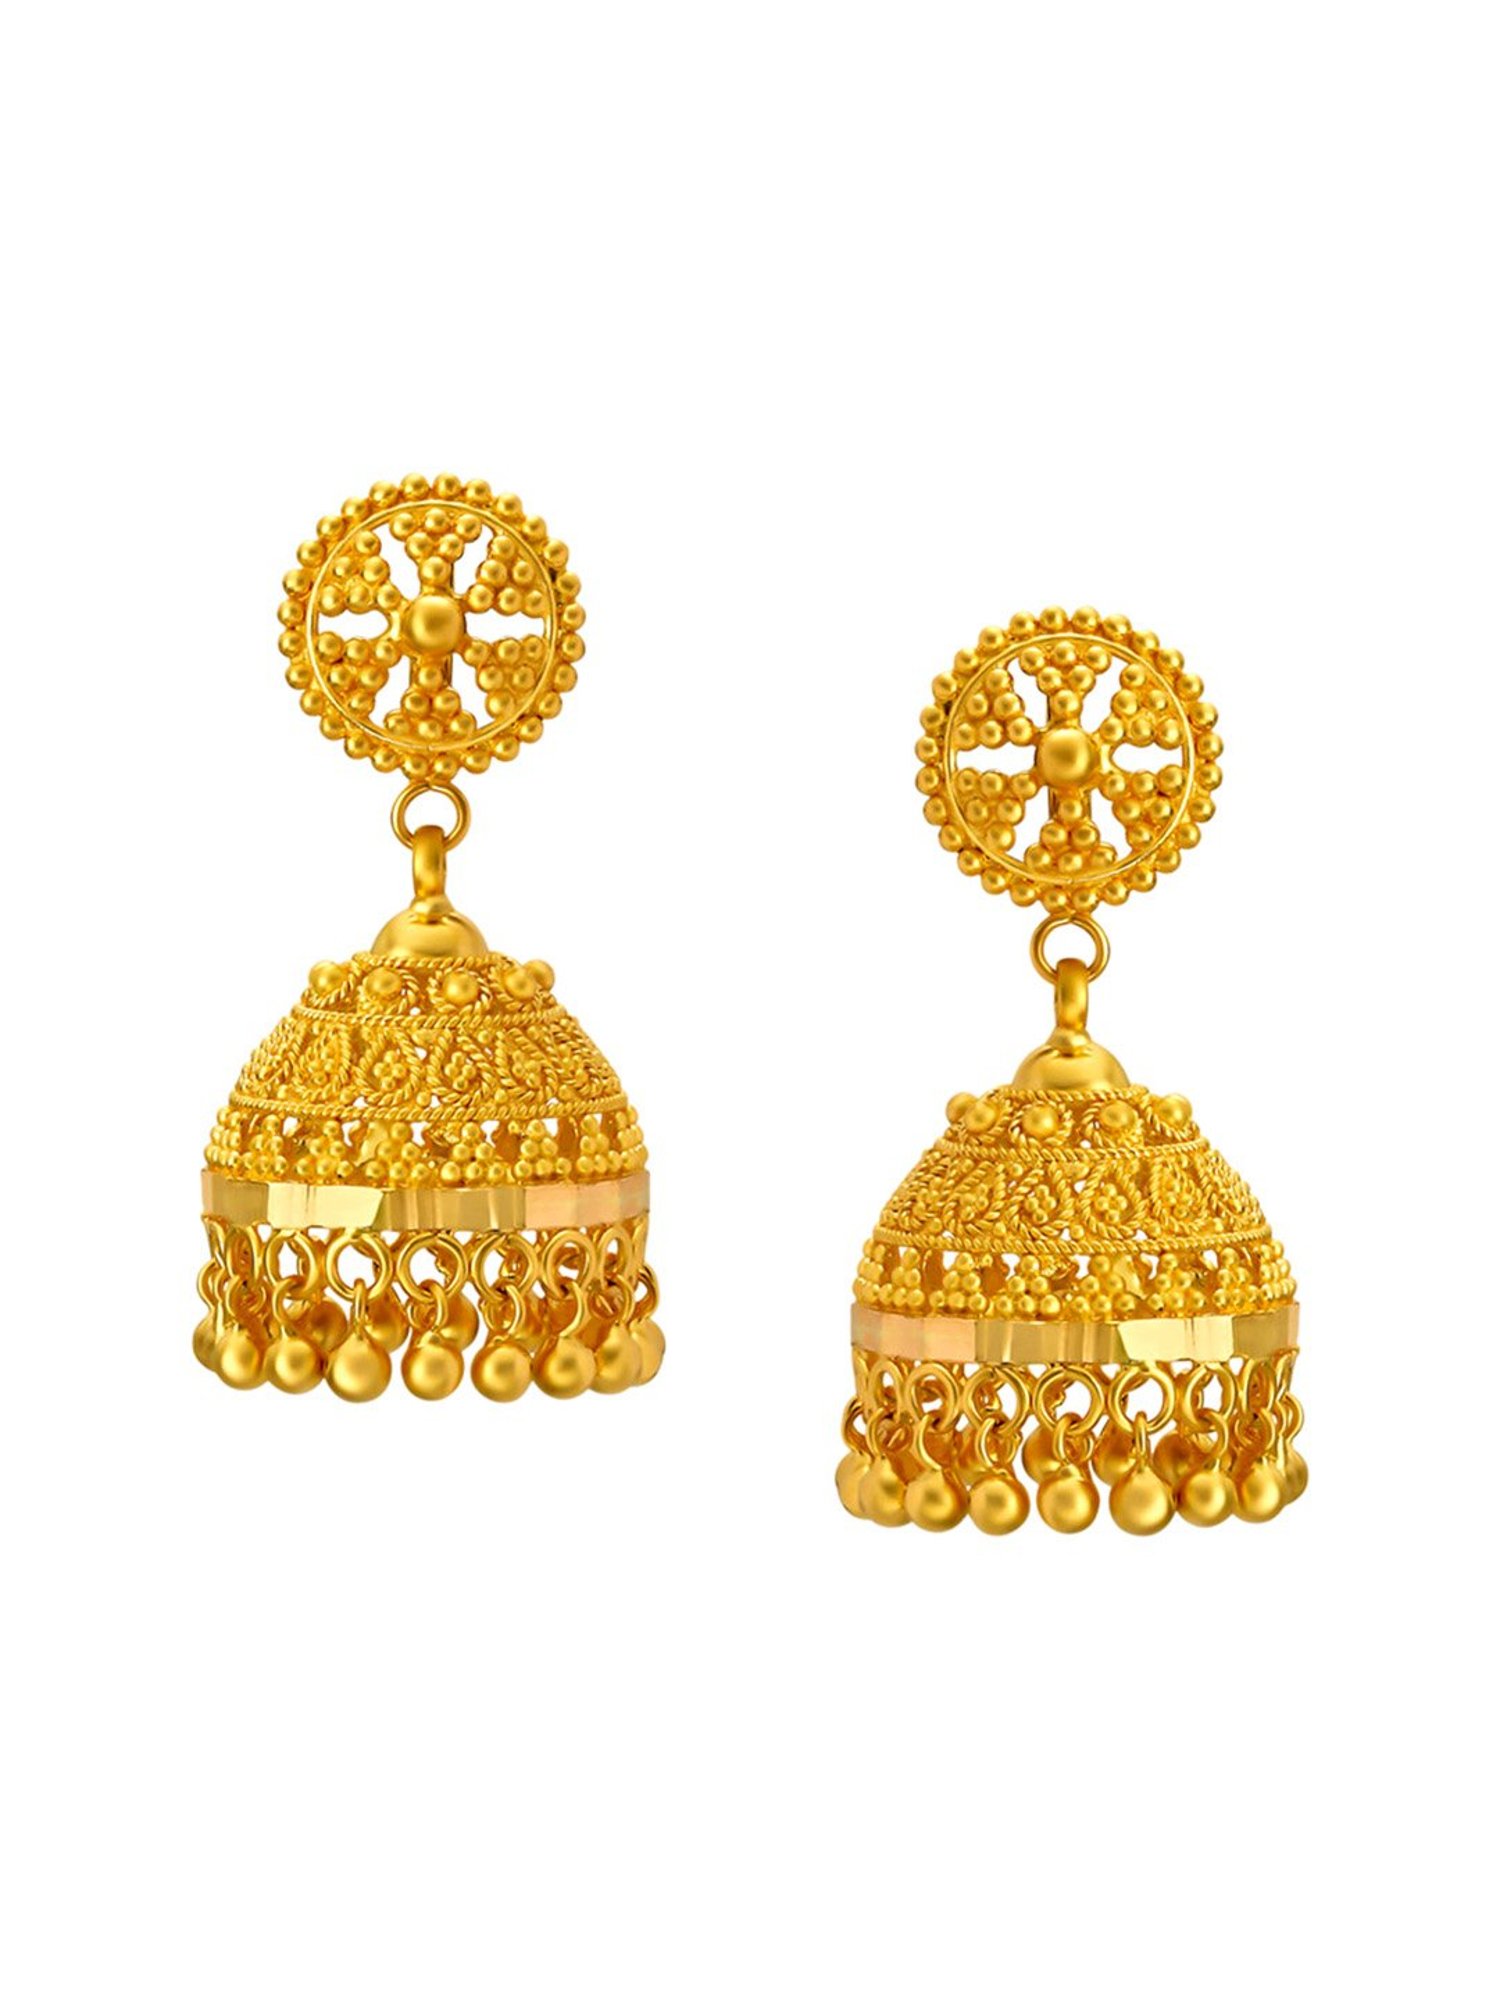 2gm onwards Light weight daily wear gold earrings with price 2022  Tanishq  earrings  Gold studs  YouTube